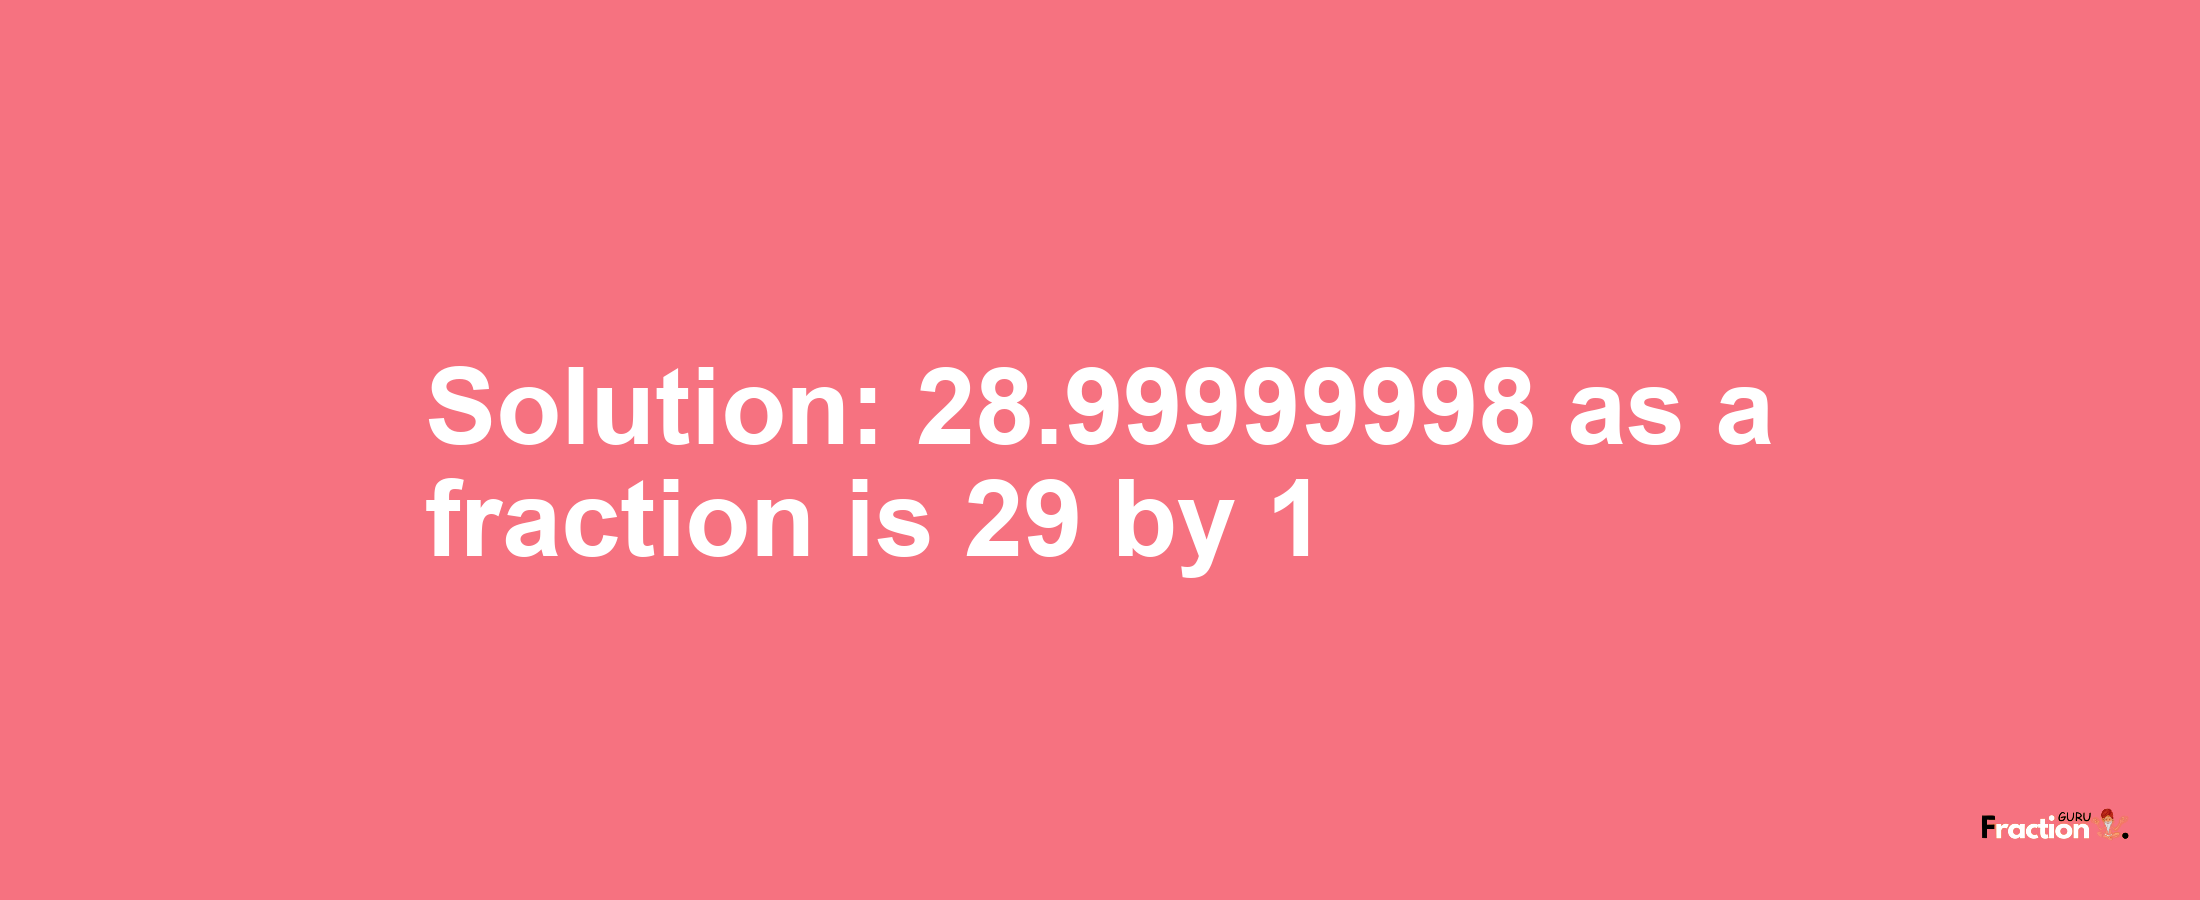 Solution:28.99999998 as a fraction is 29/1